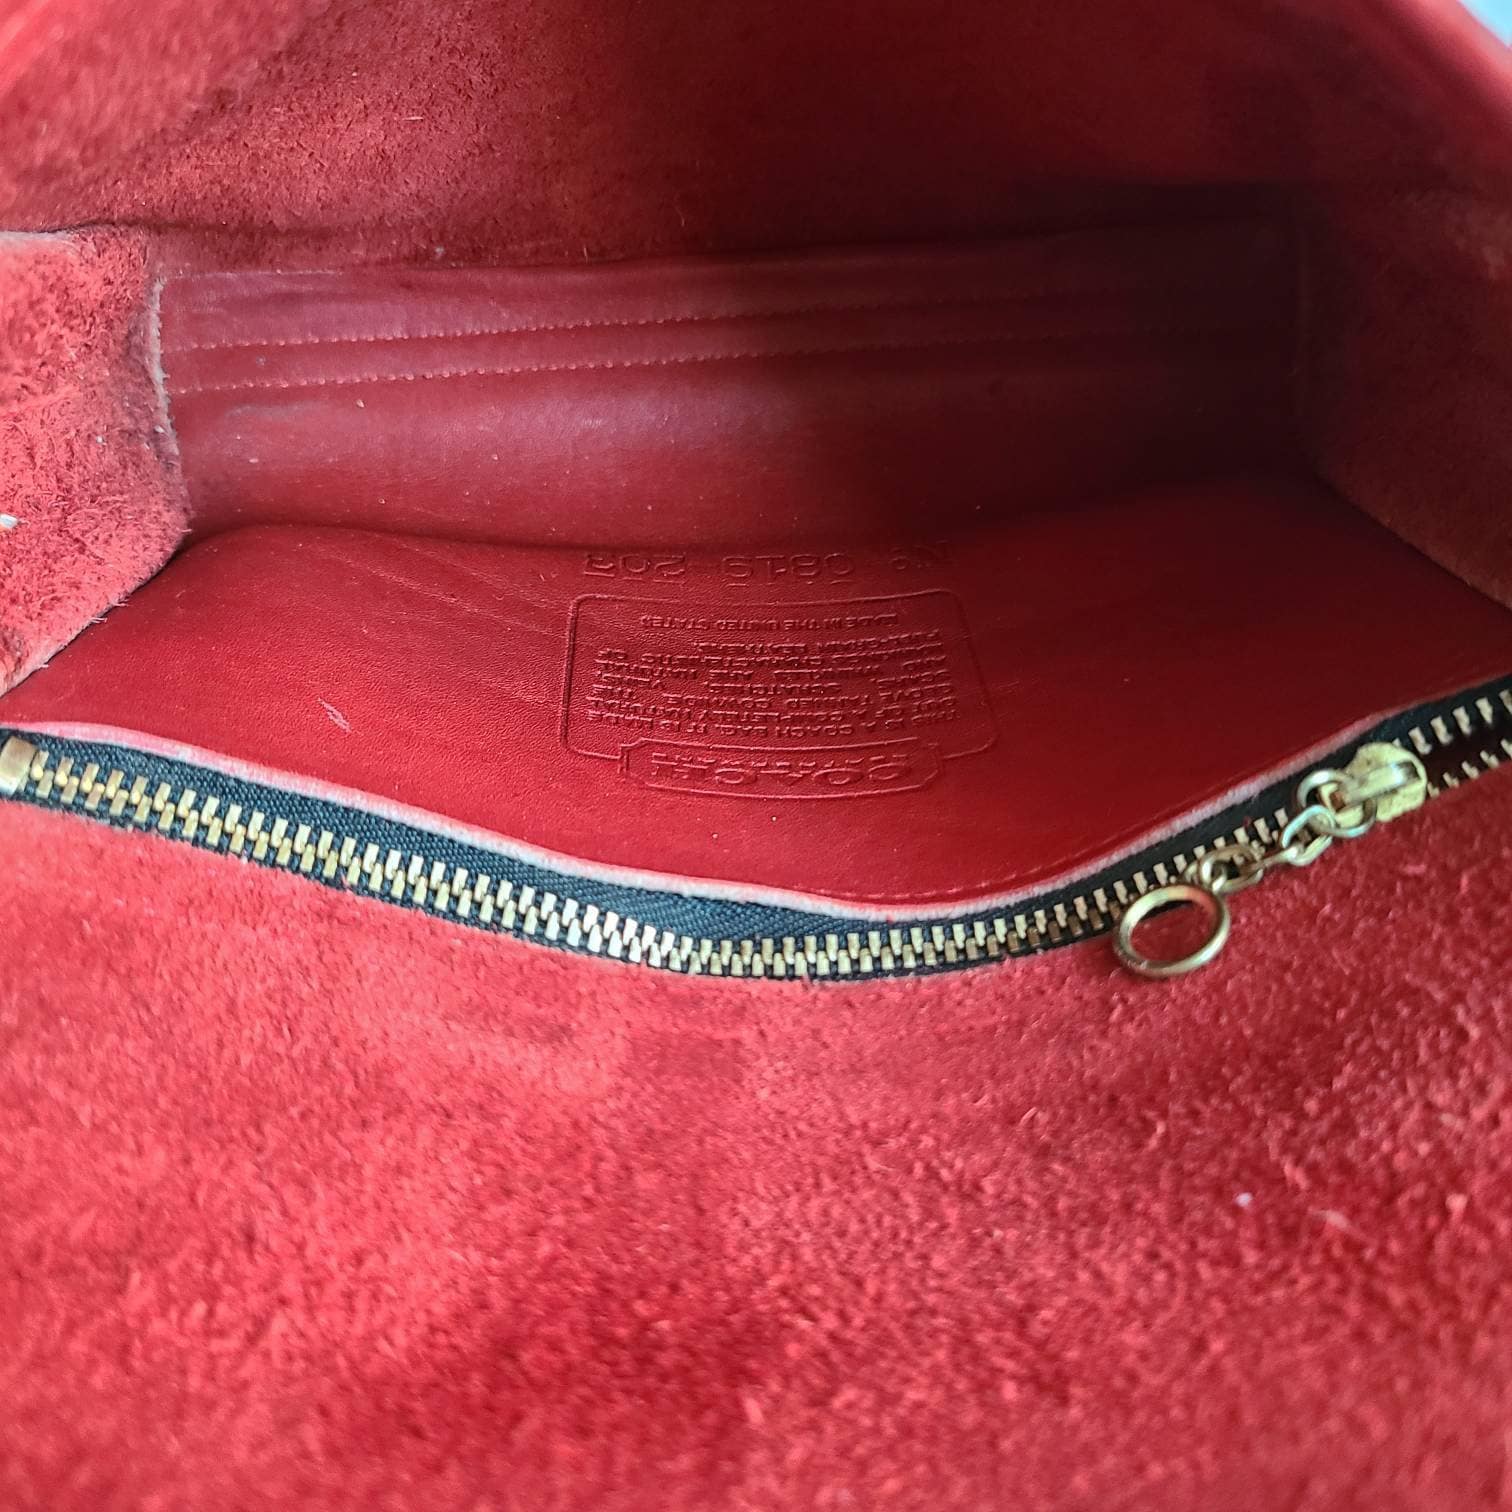 Vintage Coach Red Leather Chrystie Bag | Etsy